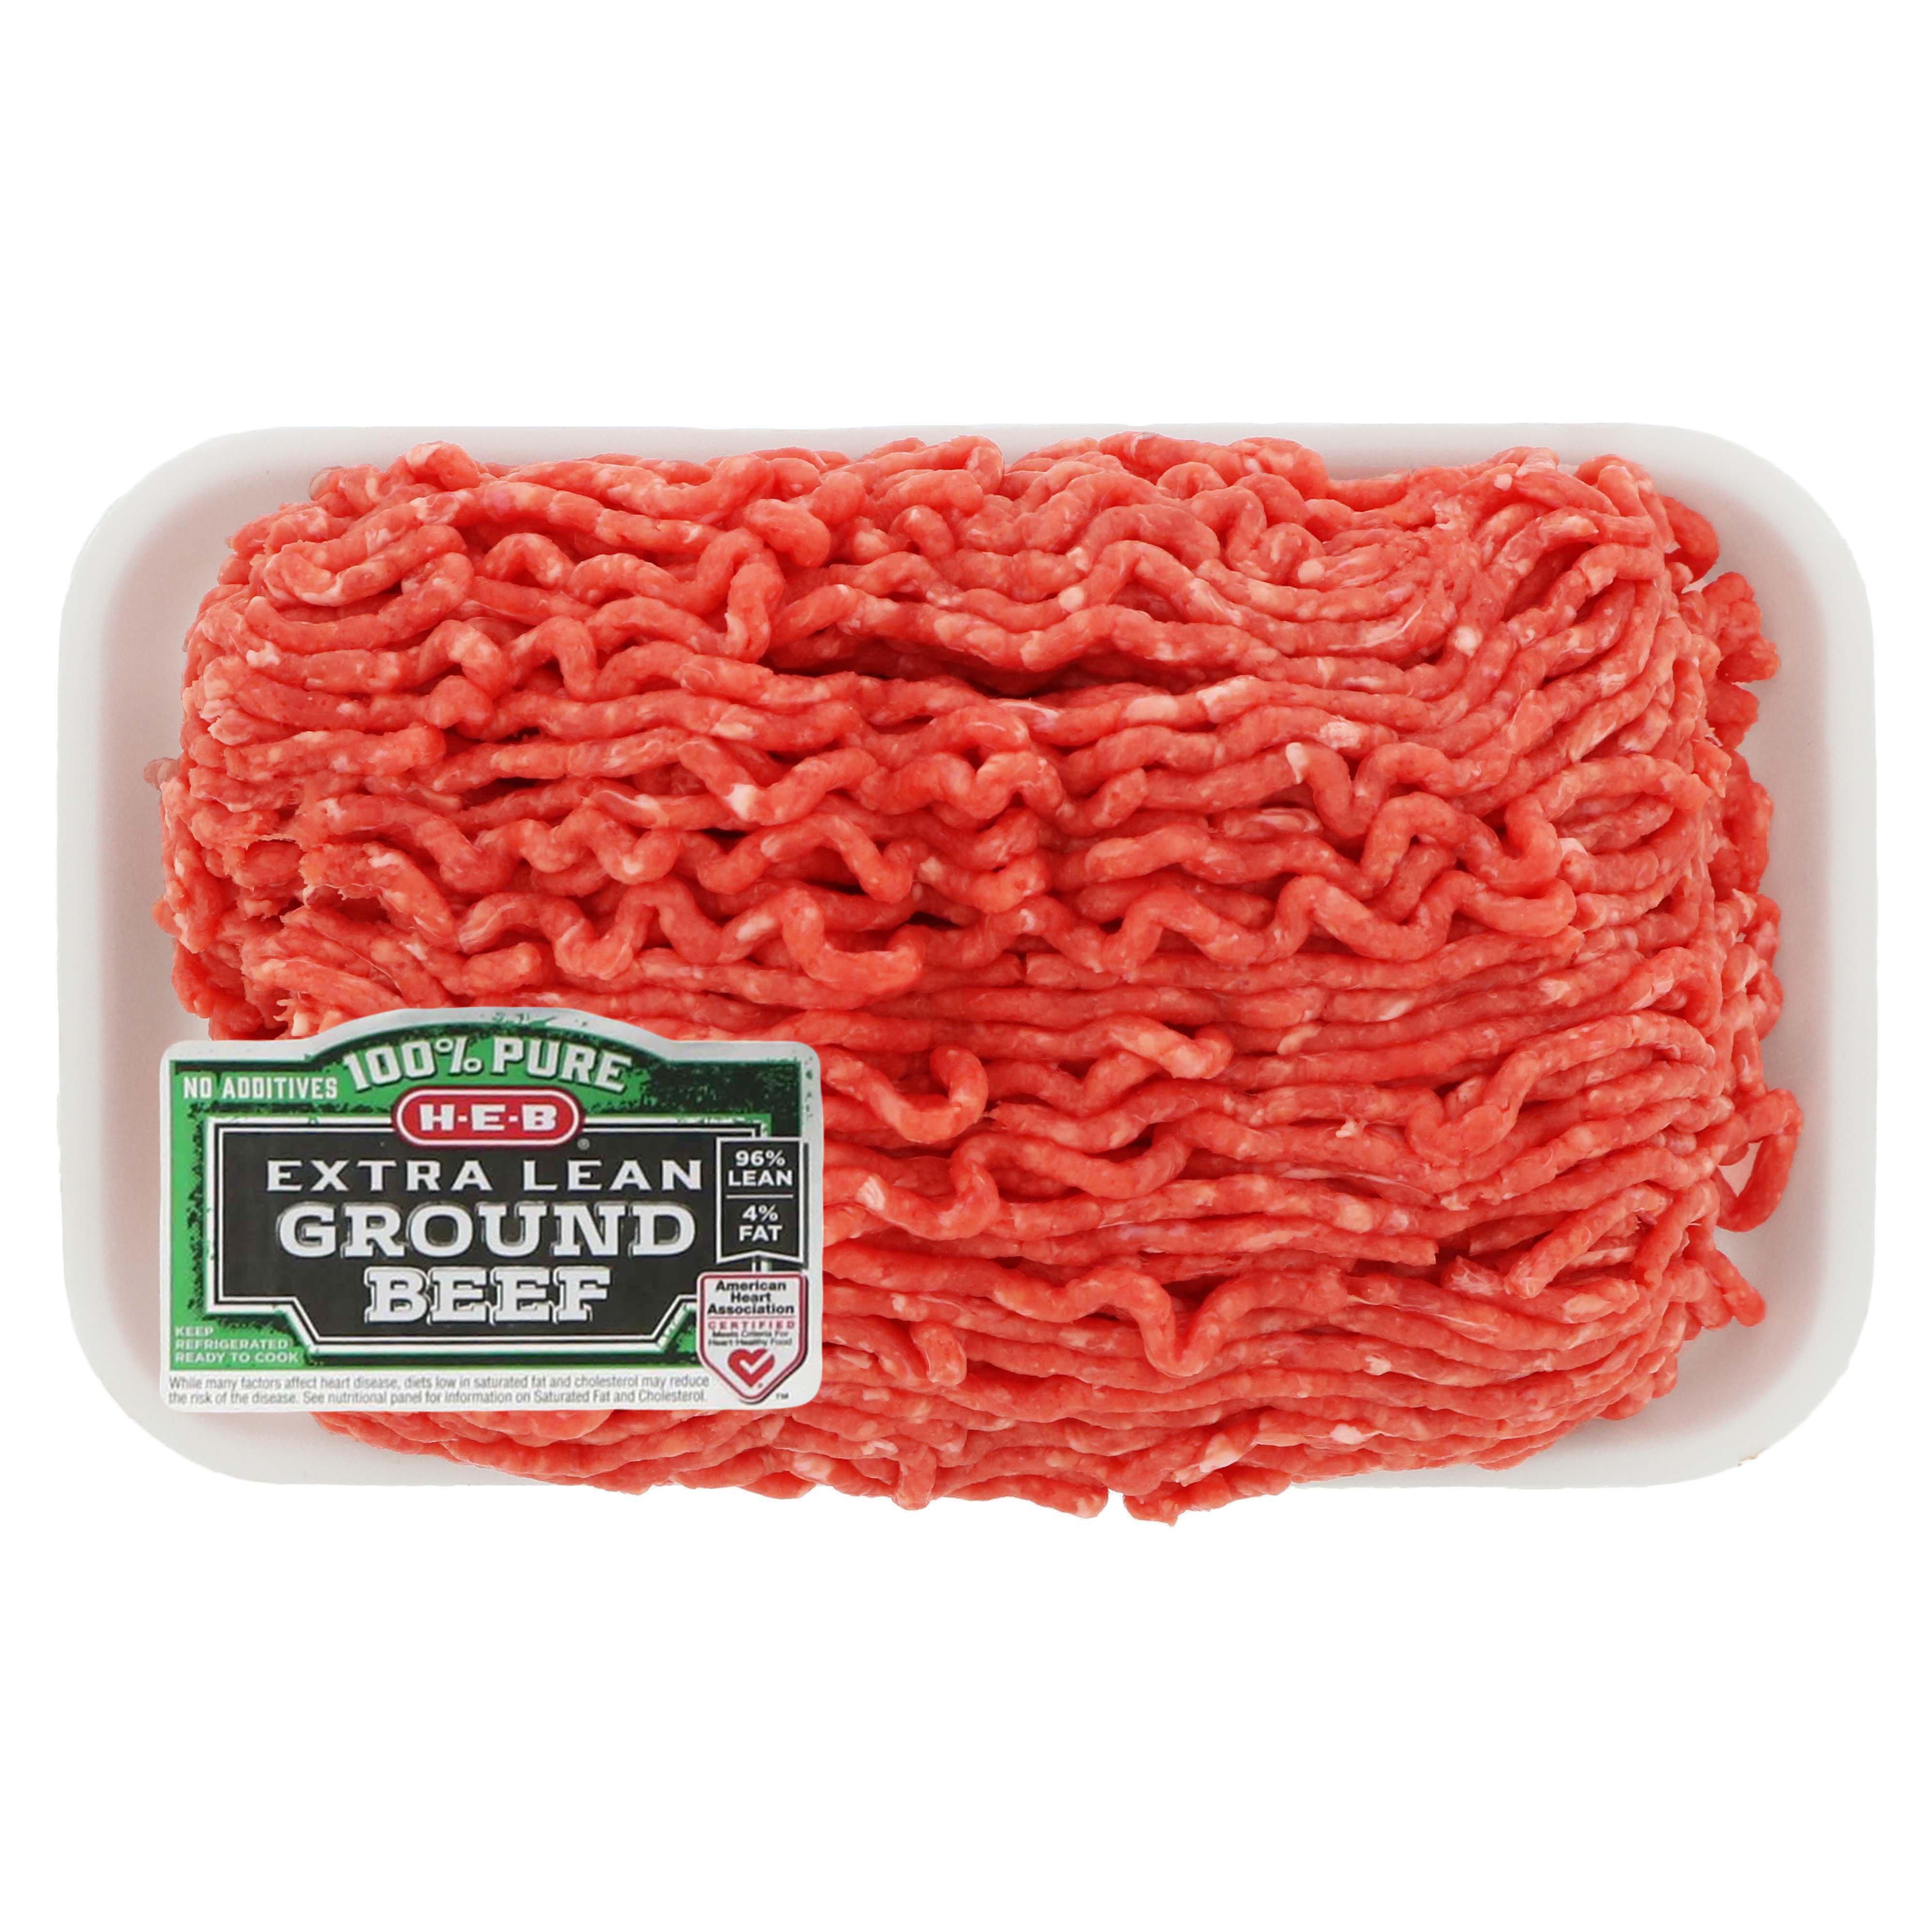 Modstand Uanset hvilken attribut H-E-B 100% Pure Extra Lean Ground Beef - 96% Lean - Shop Beef at H-E-B